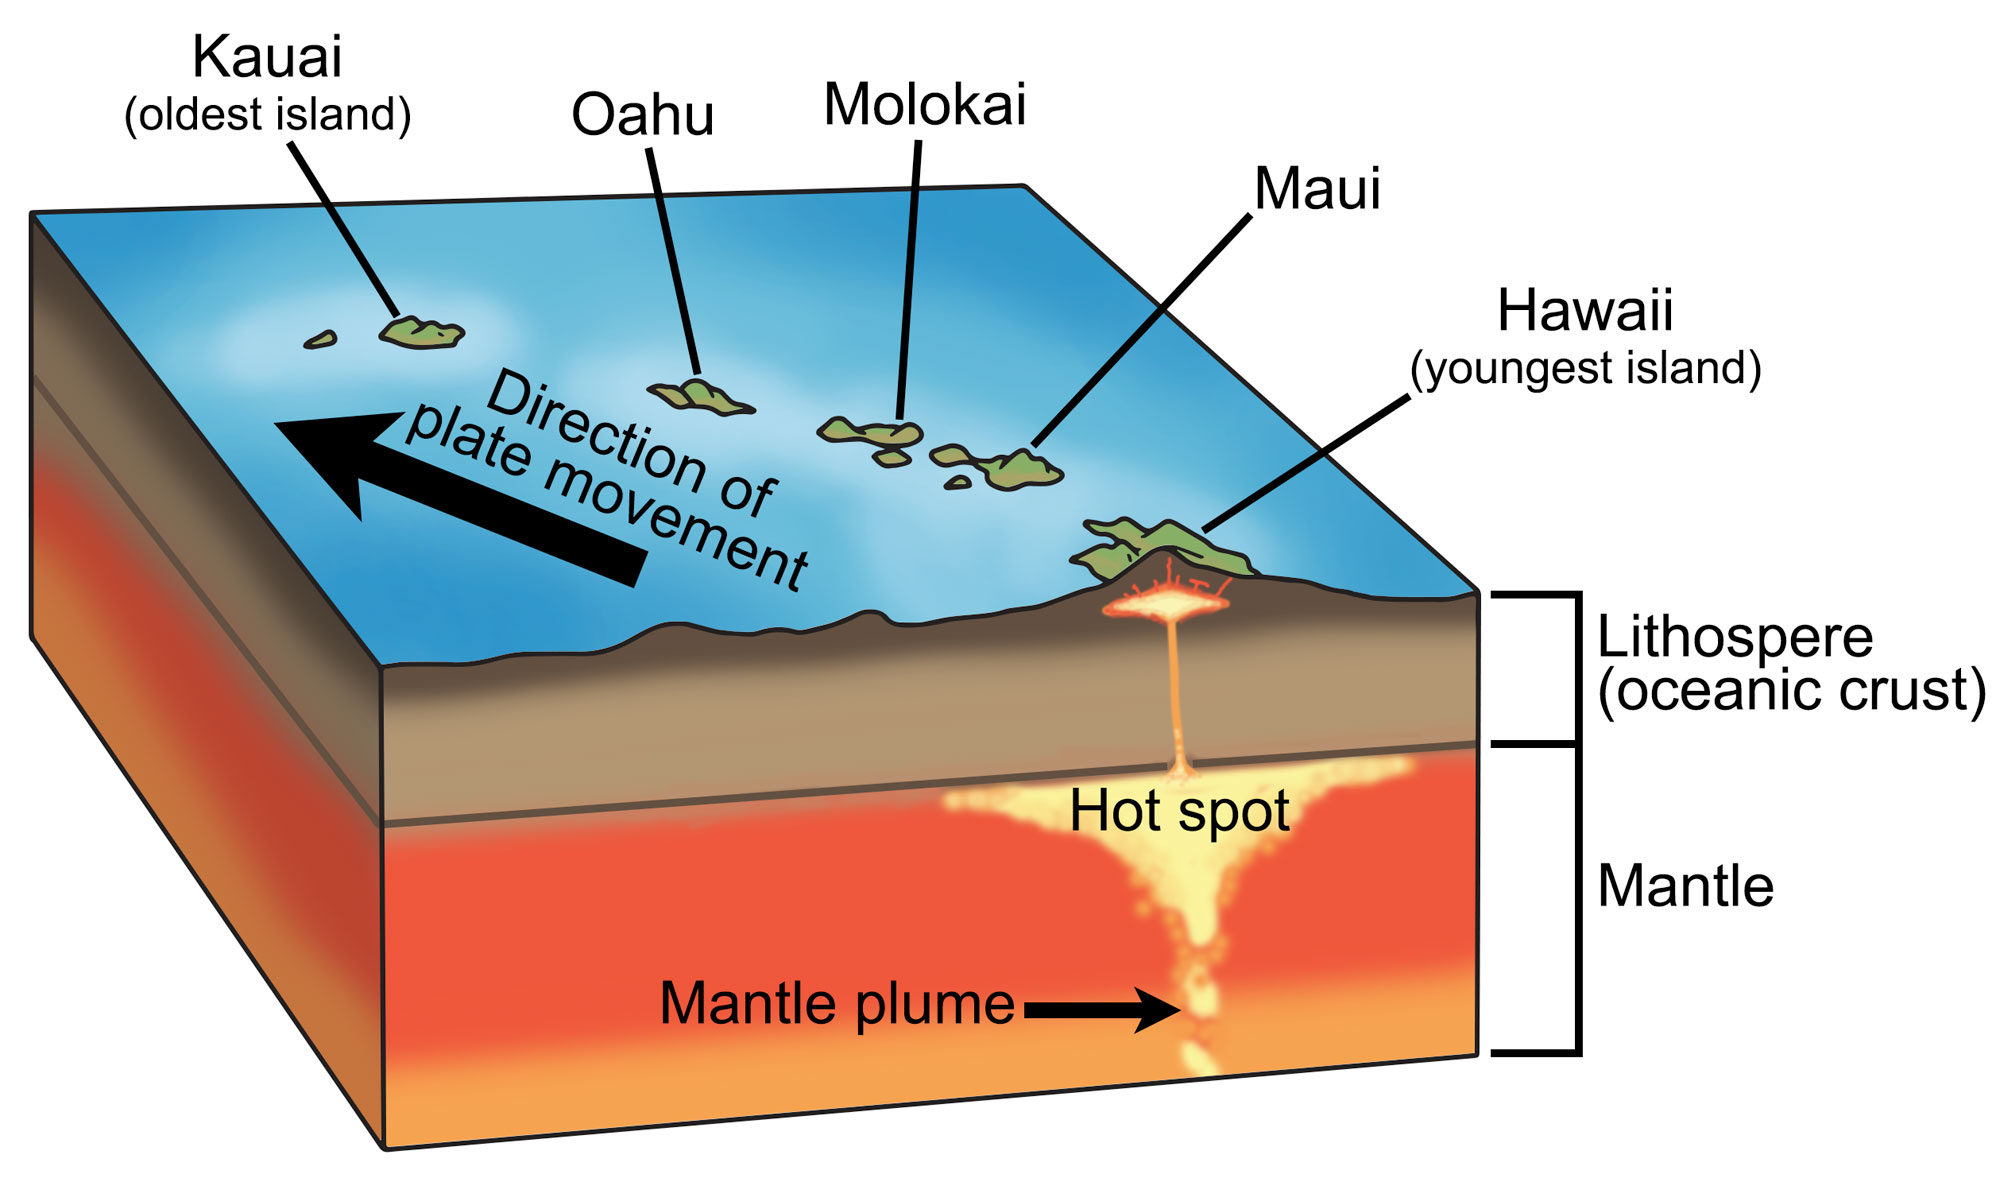 Diagram showing a cutaway view of the Earth's crust and mantle under the Hawaiian Islands. A hot spot wells up from deep in the mantle under the island of Hawaii, causing volcanism. Islands progress from younger to older further from the hot spot.